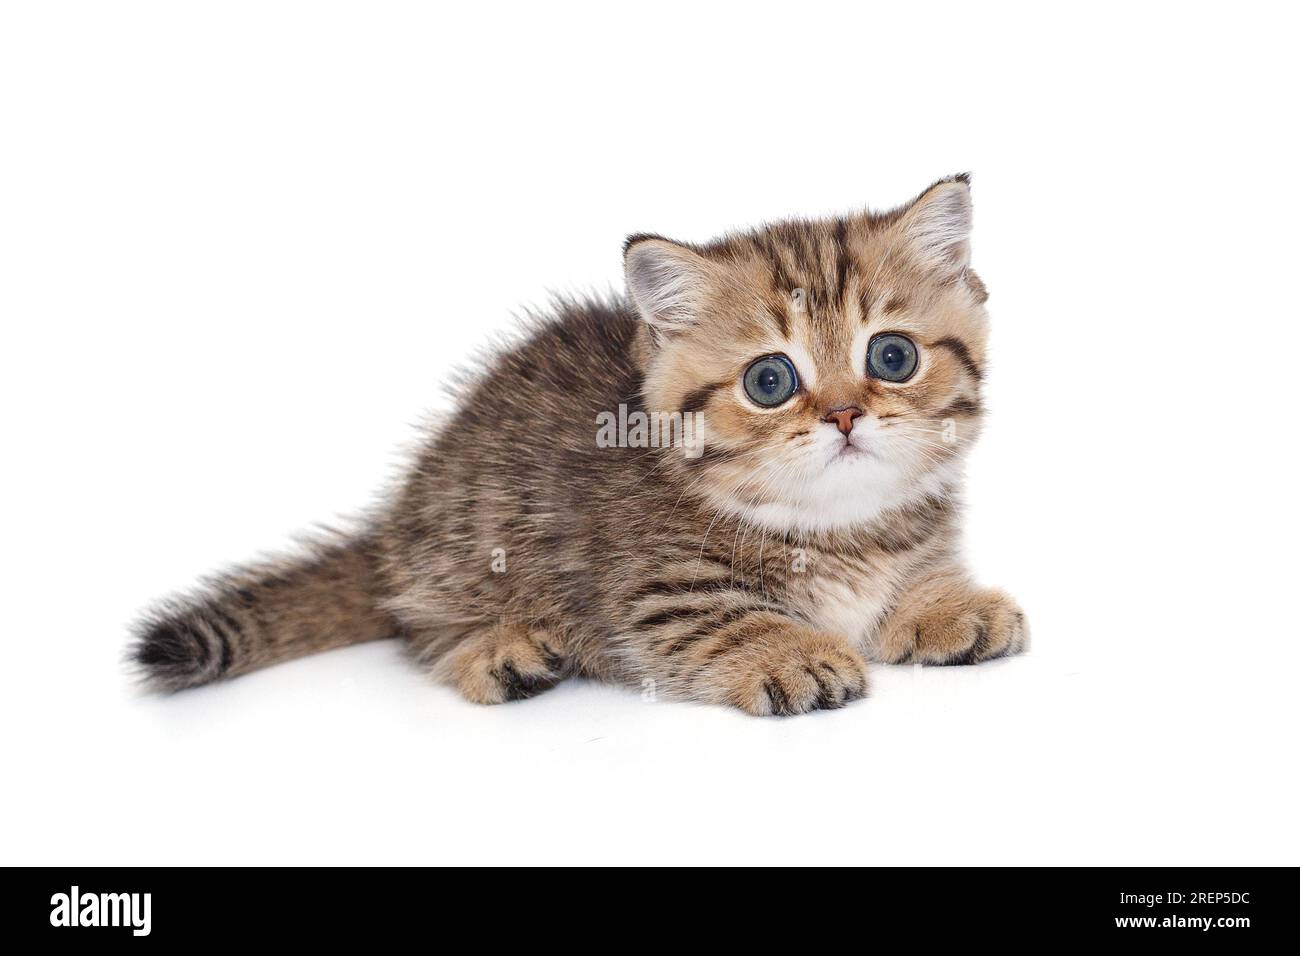 Small, striped Scottish kitten, isolated on a white background Stock Photo